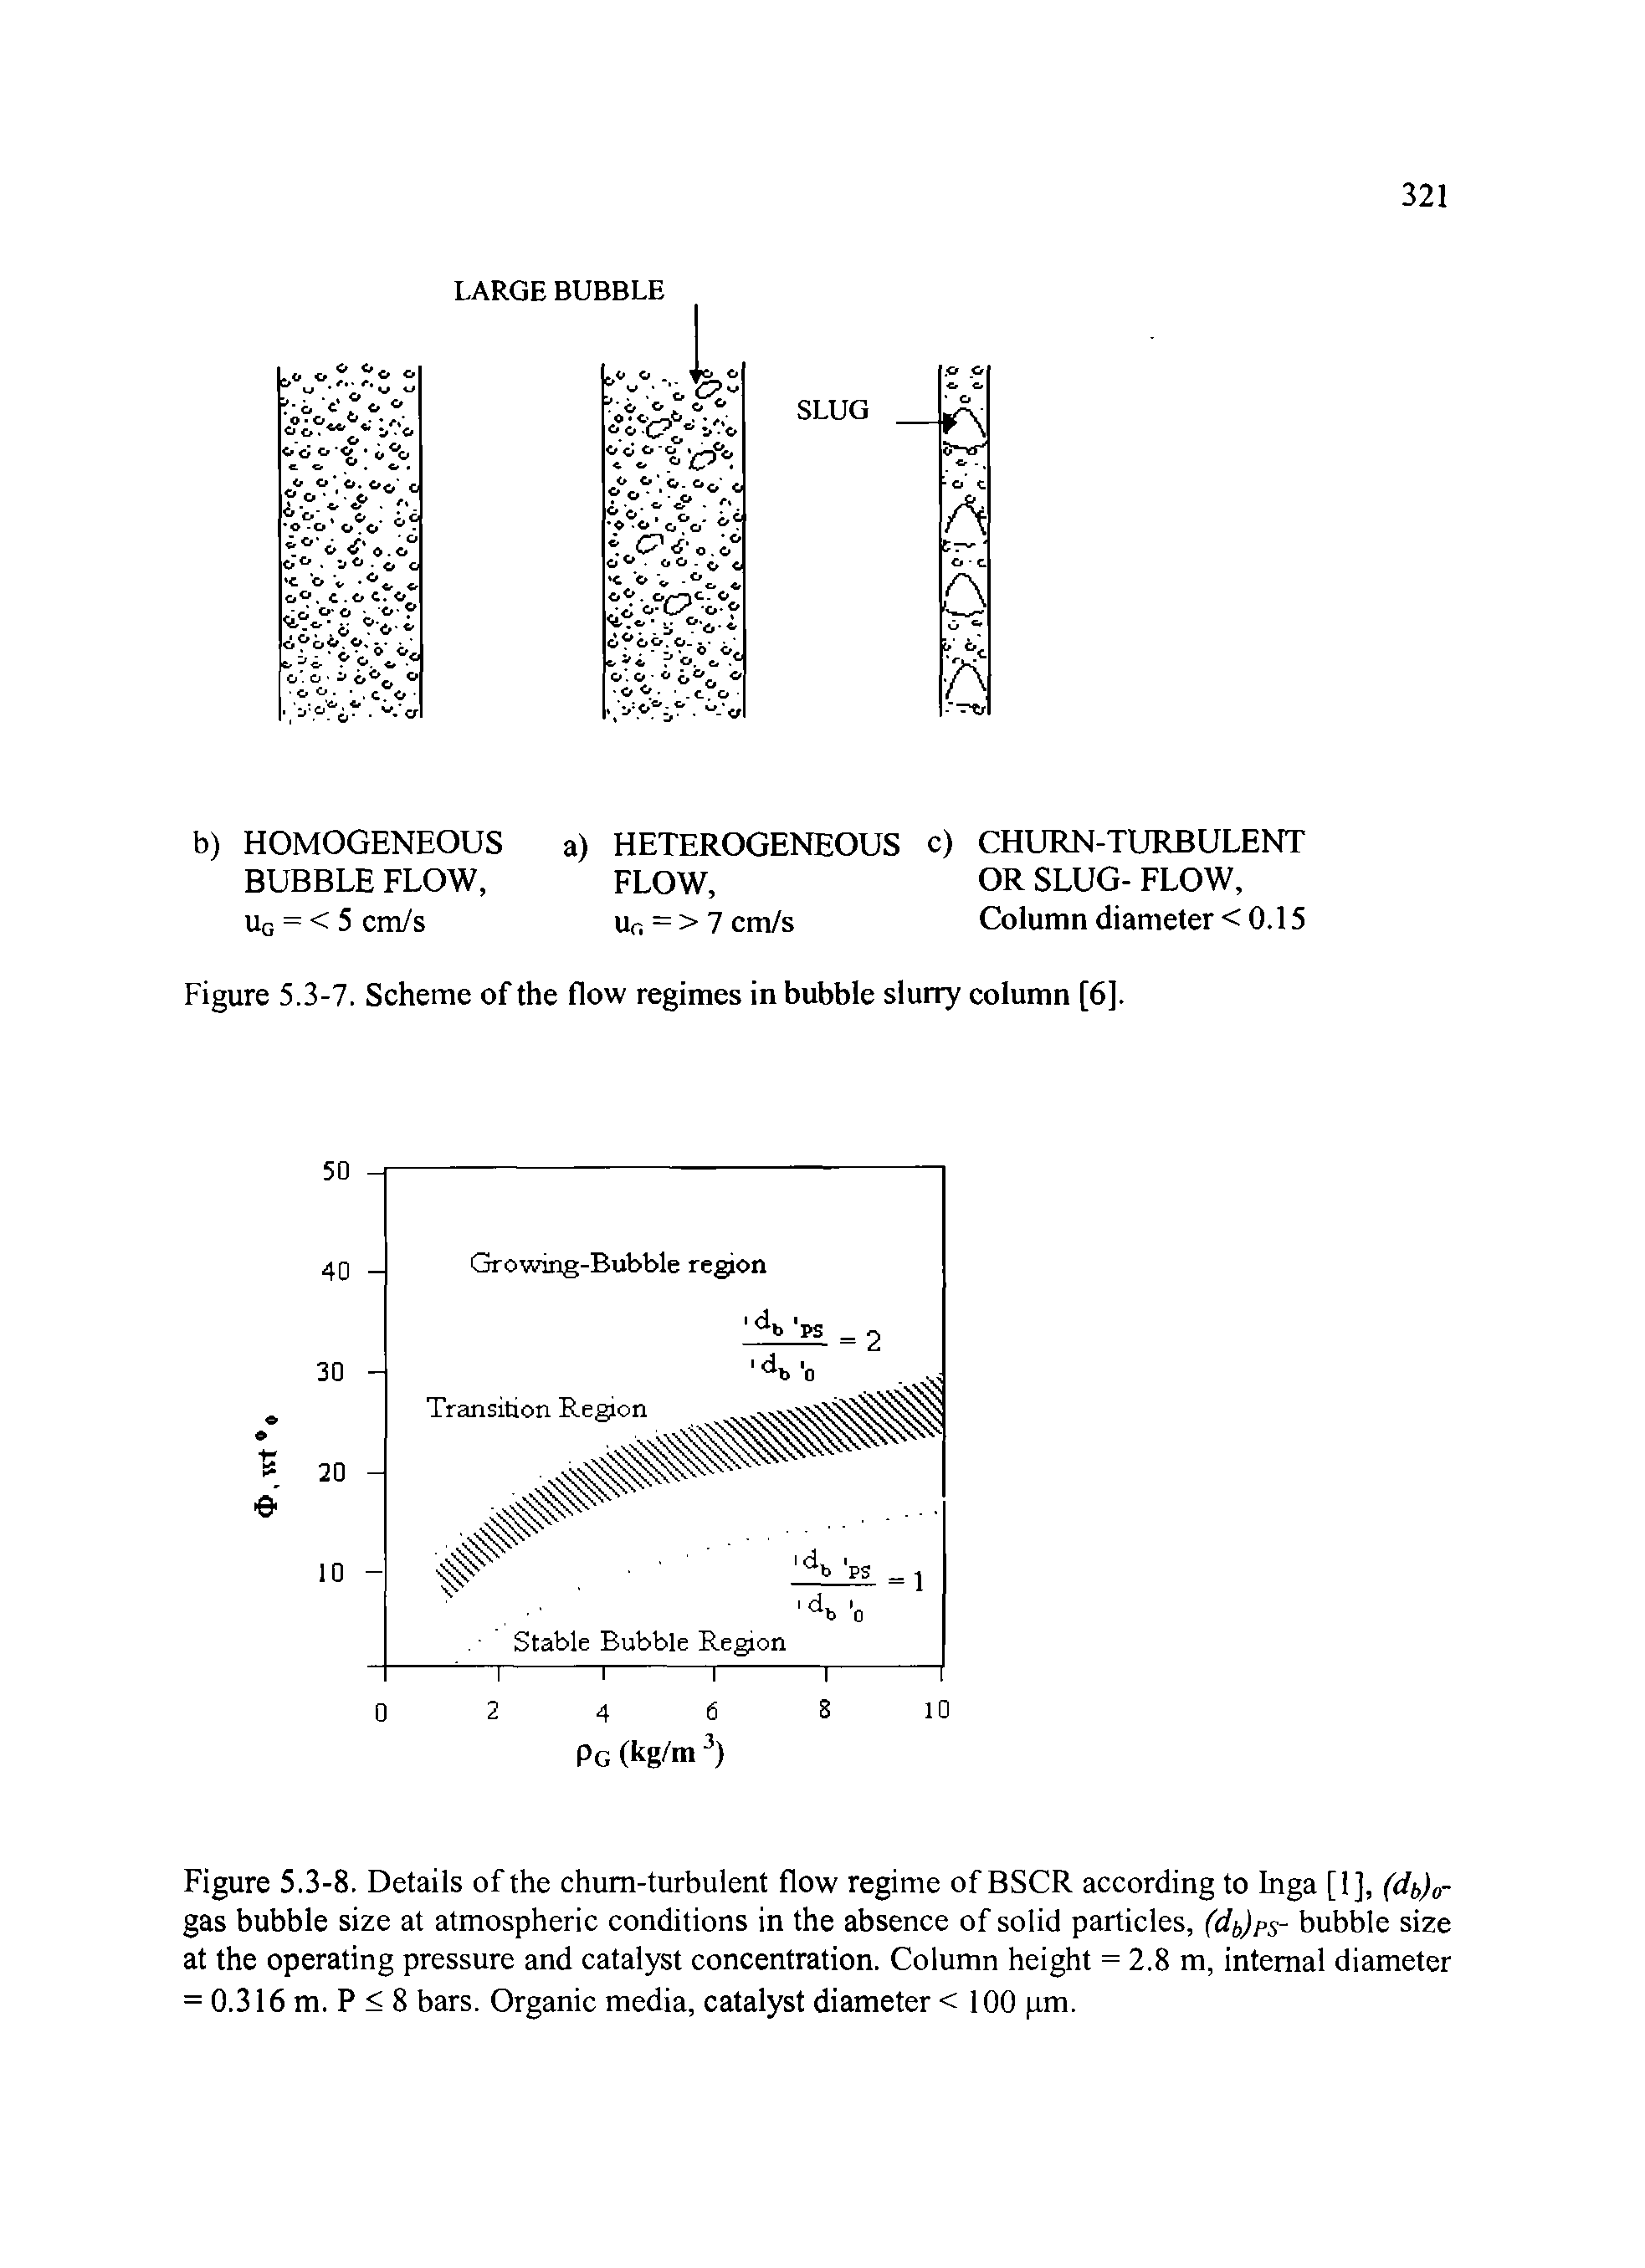 Figure 5.3-8. Details of the chum-turbulent flow regime of BSCR according to Inga [1], (db)0-gas bubble size at atmospheric conditions in the absence of solid particles, (d, )ps- bubble size at the operating pressure and catalyst concentration. Column height = 2.8 m, internal diameter = 0.316 m. P < 8 bars. Organic media, catalyst diameter < 100 pm.